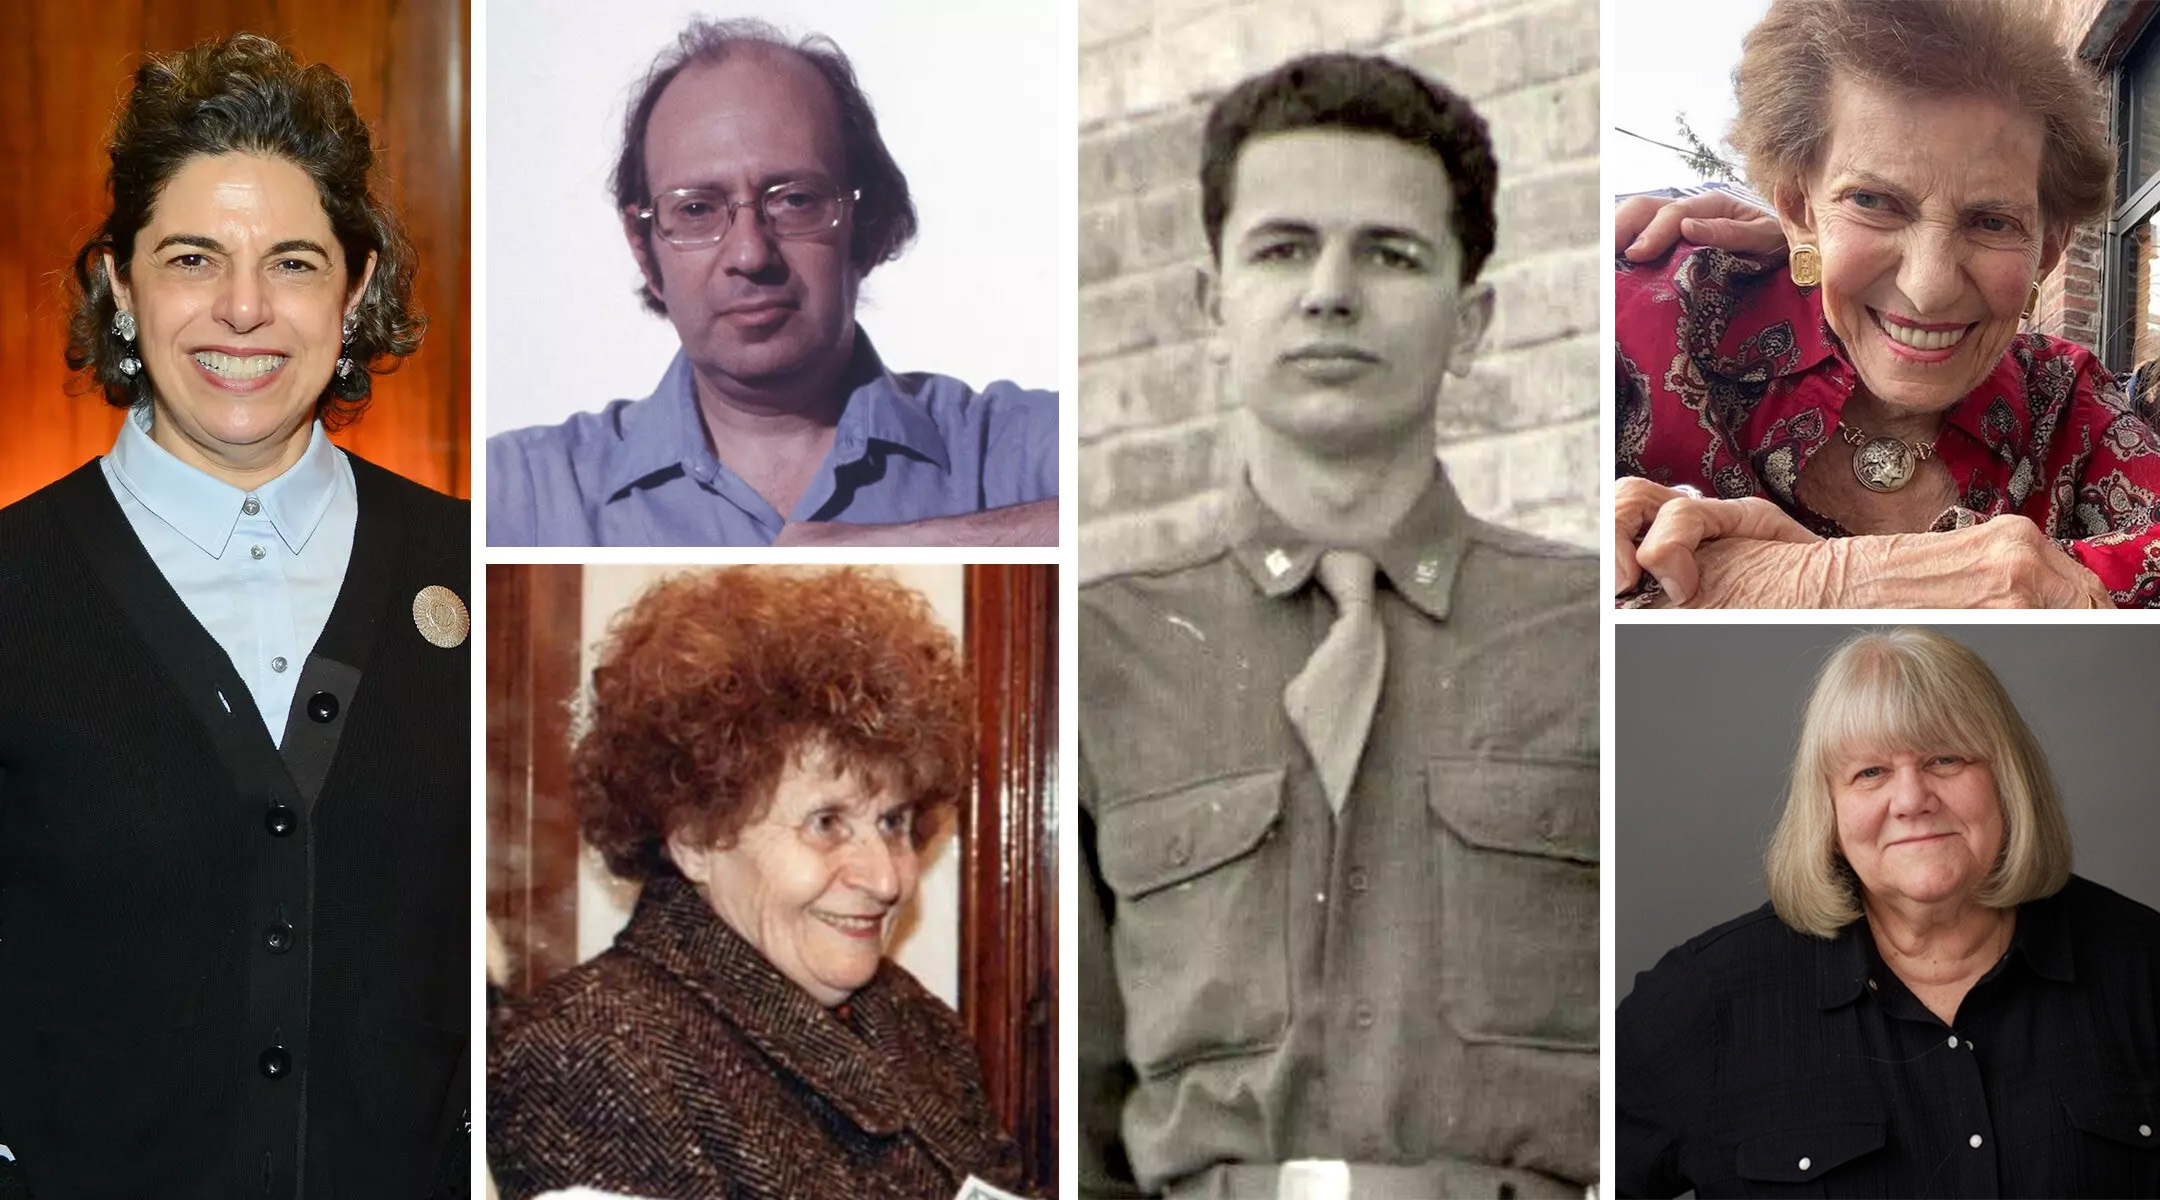 Clockwise, from left: Author Lori Zabar, artist Philip Pearlstein, war hero Maximilian Lerner, grandmother Barbara Roaman, musician Sarah Schlesinger and camp director Chave Hecht. (Collage by Mollie Suss)